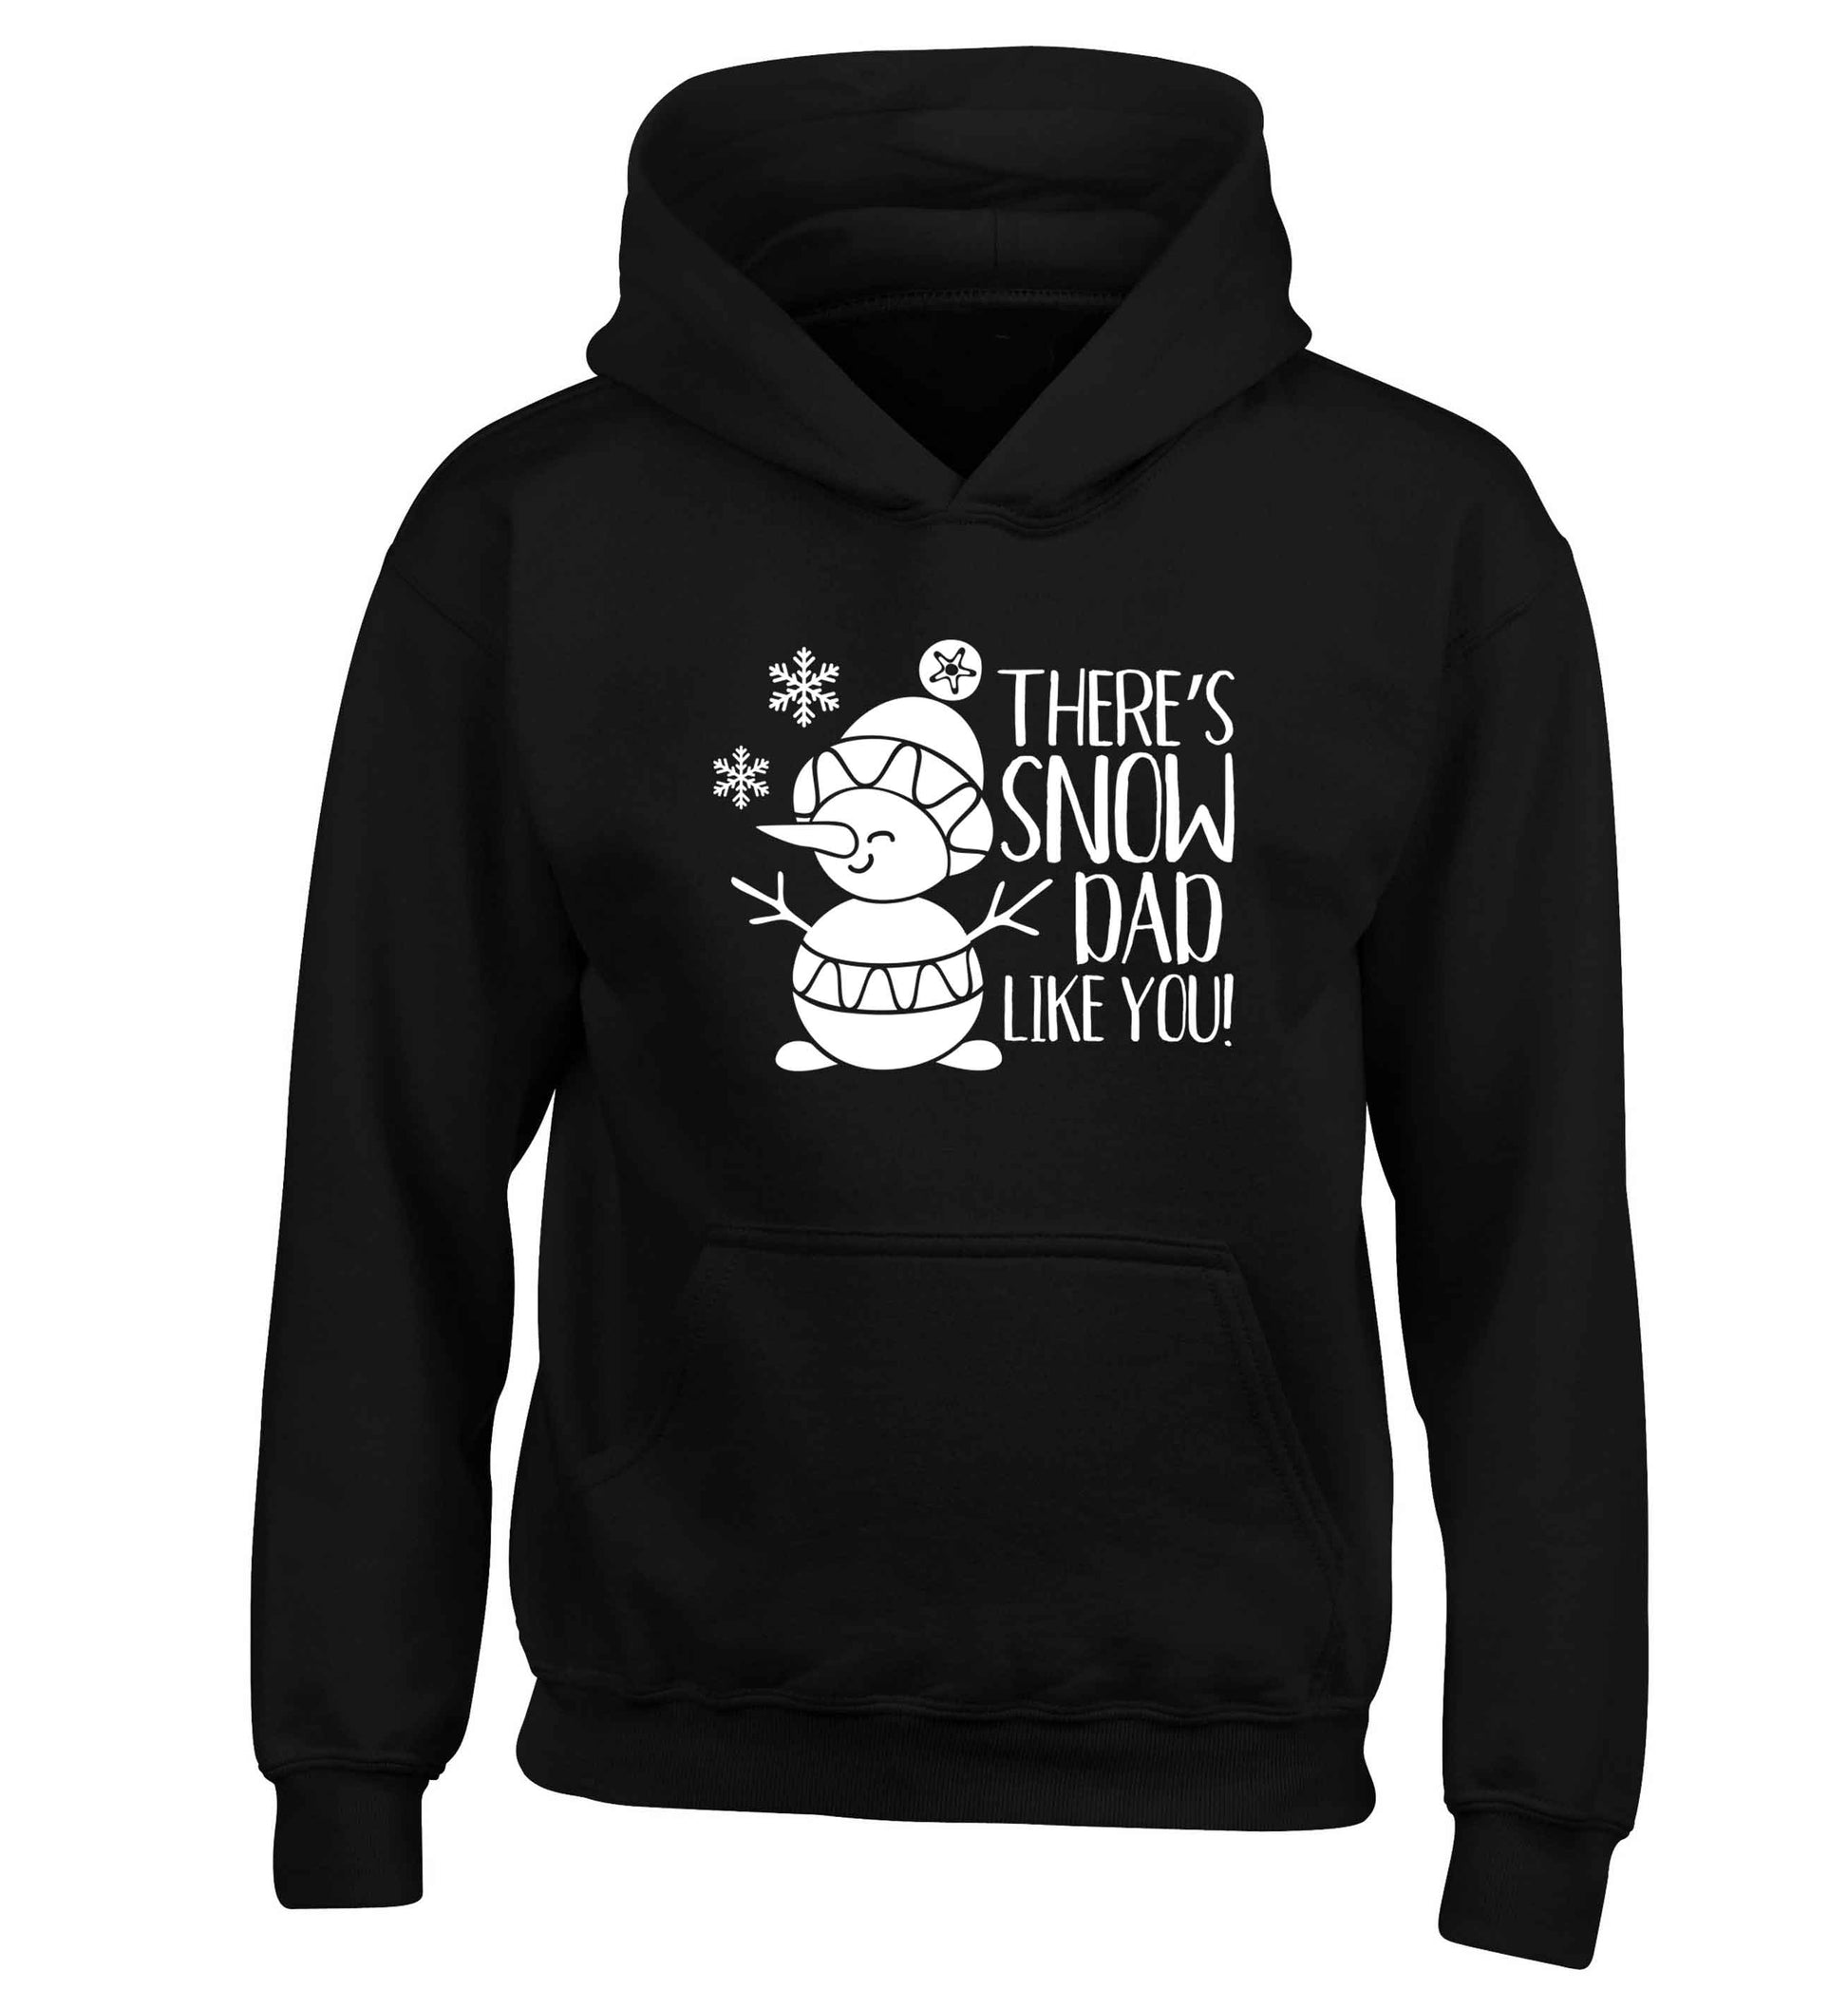 There's snow dad like you children's black hoodie 12-13 Years